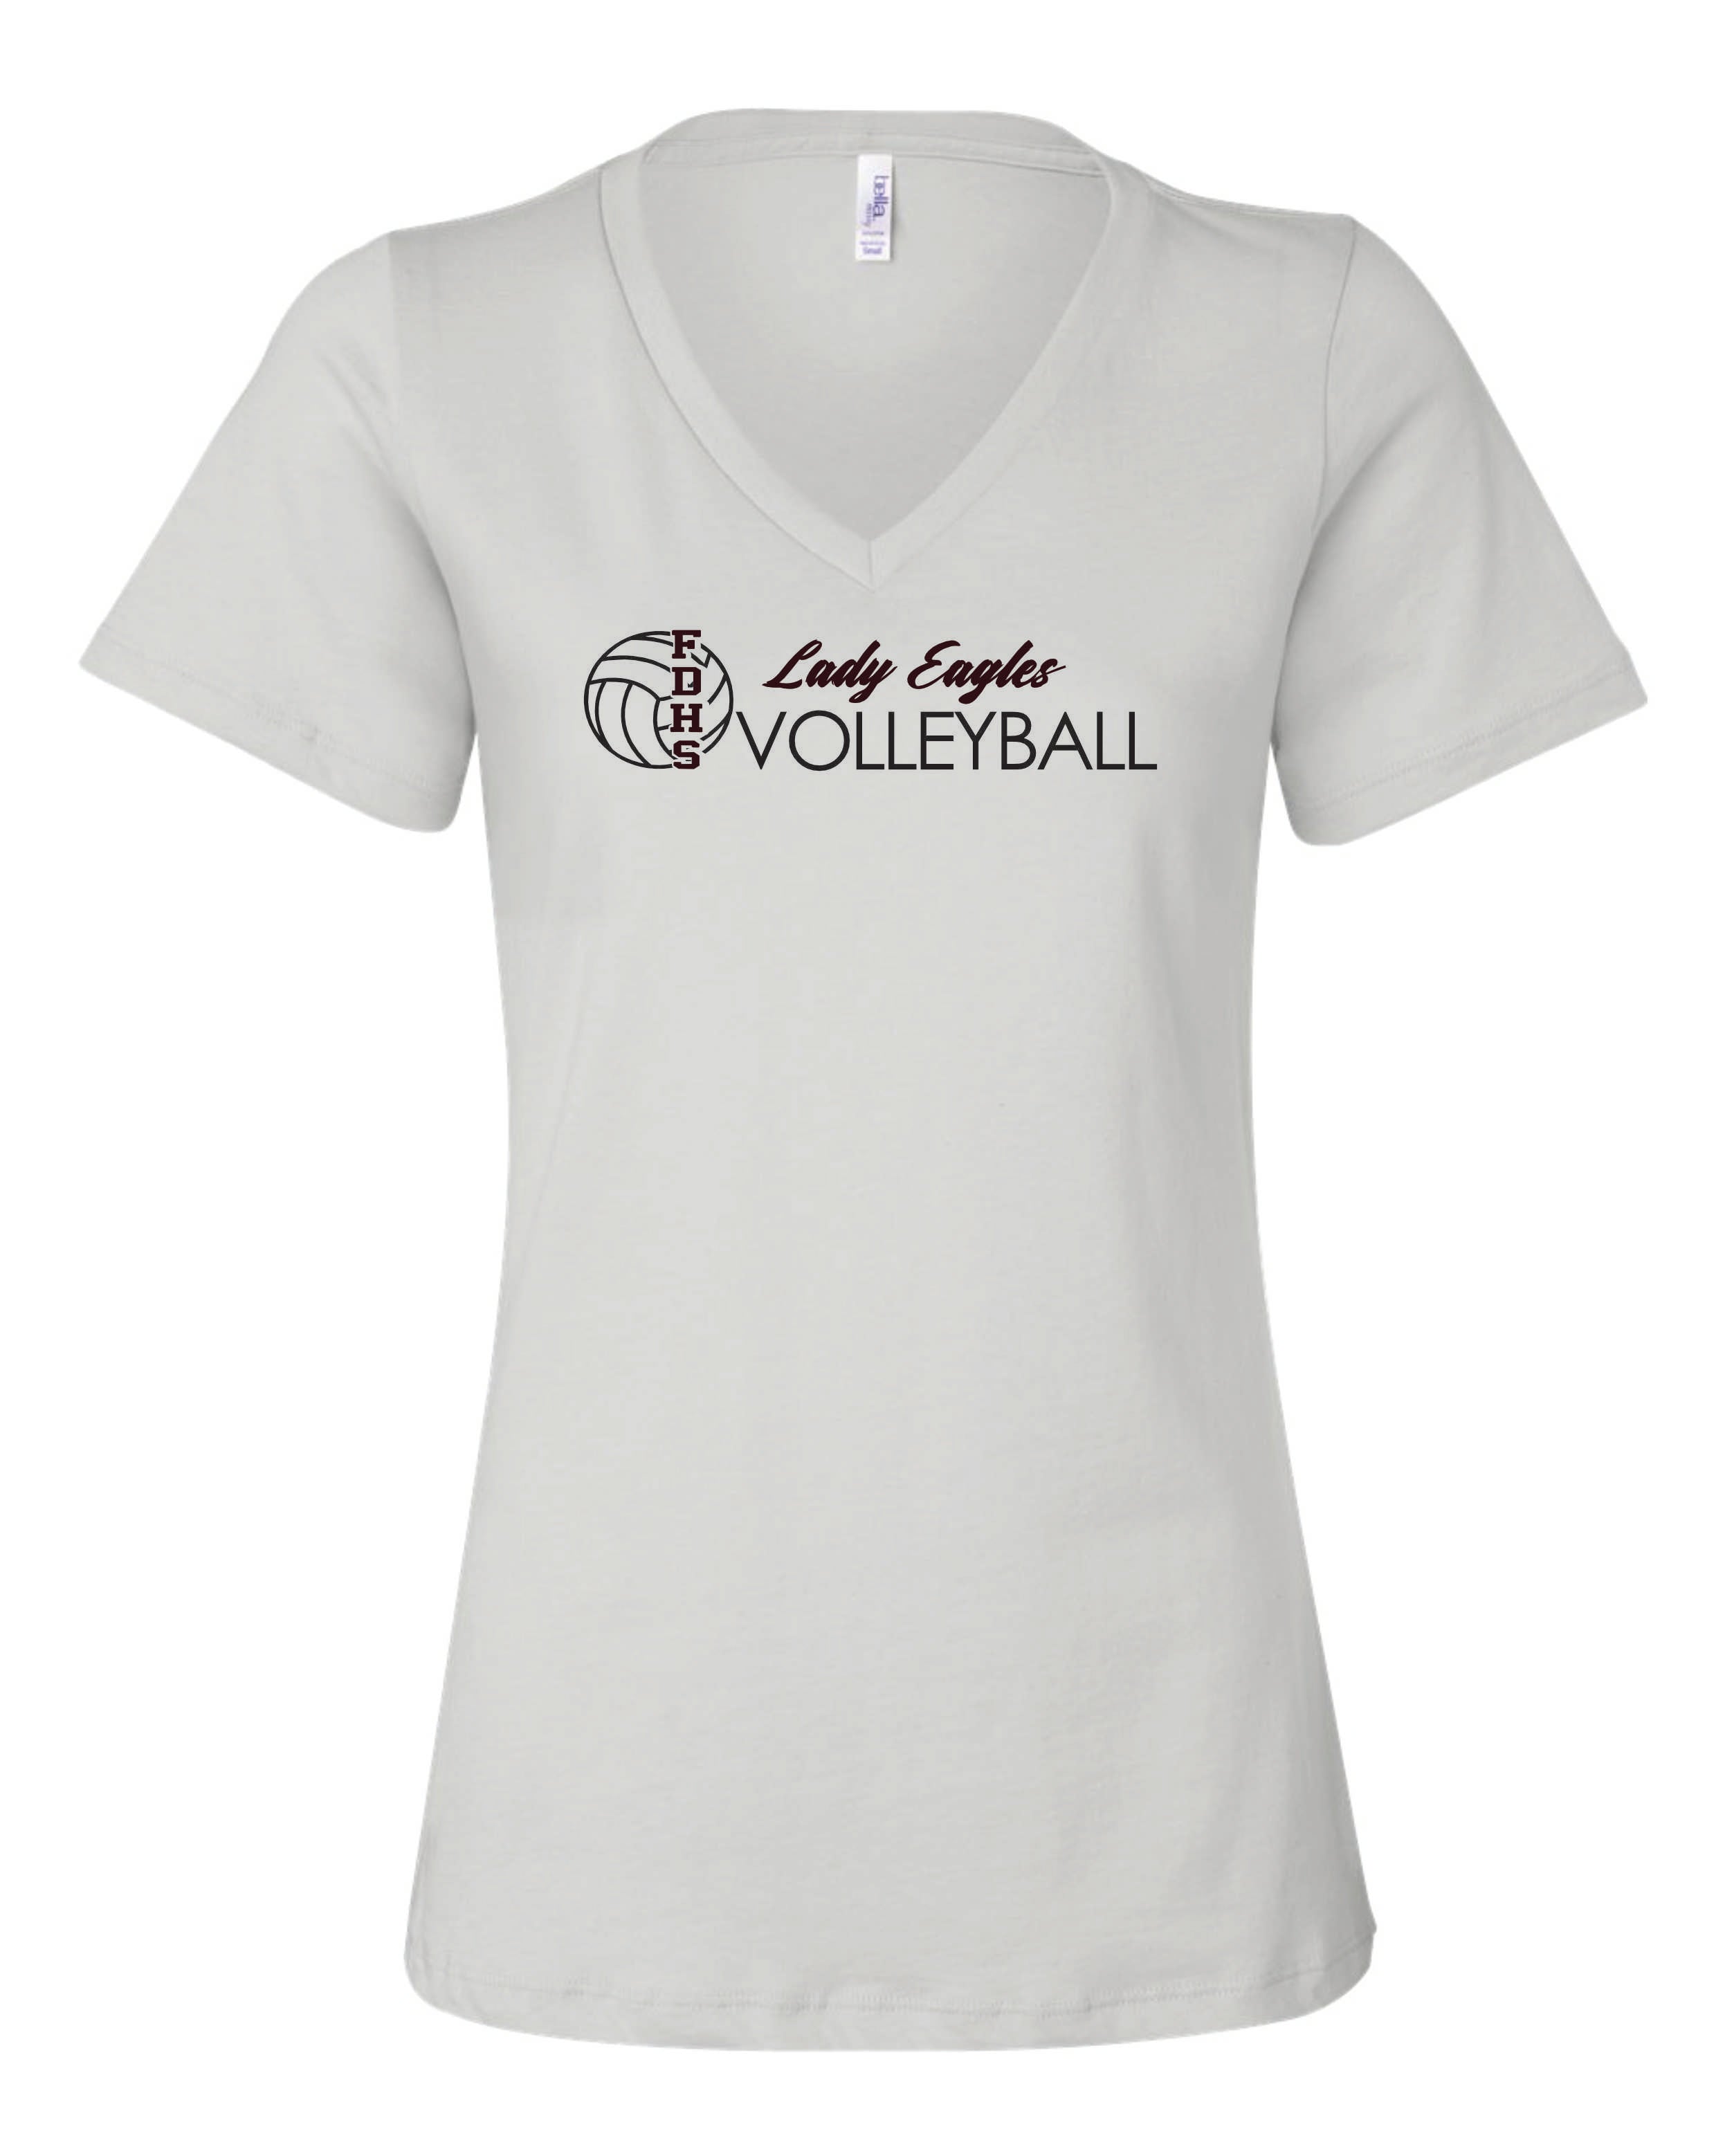 DOUGLASS VOLLEYBALL Women's Bella and Canvas Short Sleeve Relaxed Fit V Neck